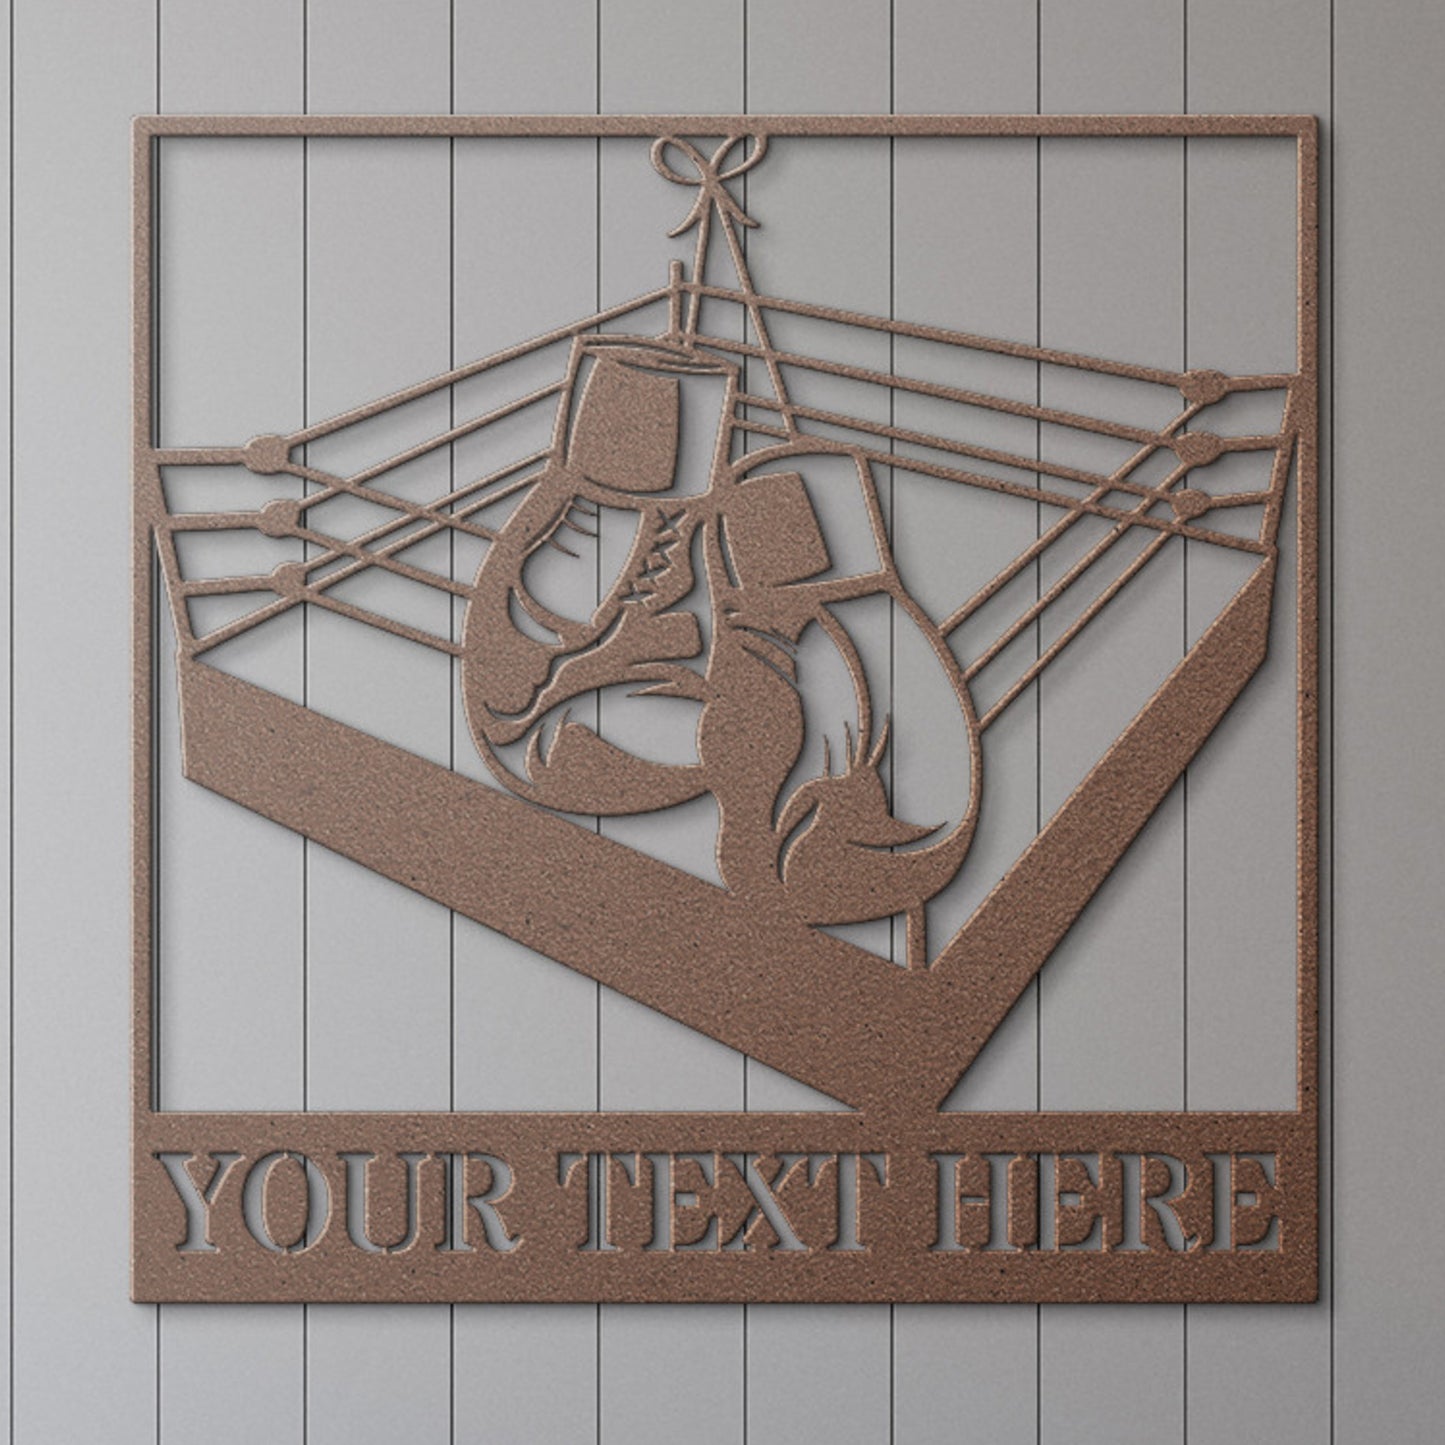 Personalized Boxing Ring Name Metal Sign Gift. Custom Boxer Wall Decor. Gift For Boxer. Boxing Club Decor. Fighting Arena Display. Boxing Gloves With Custom Text